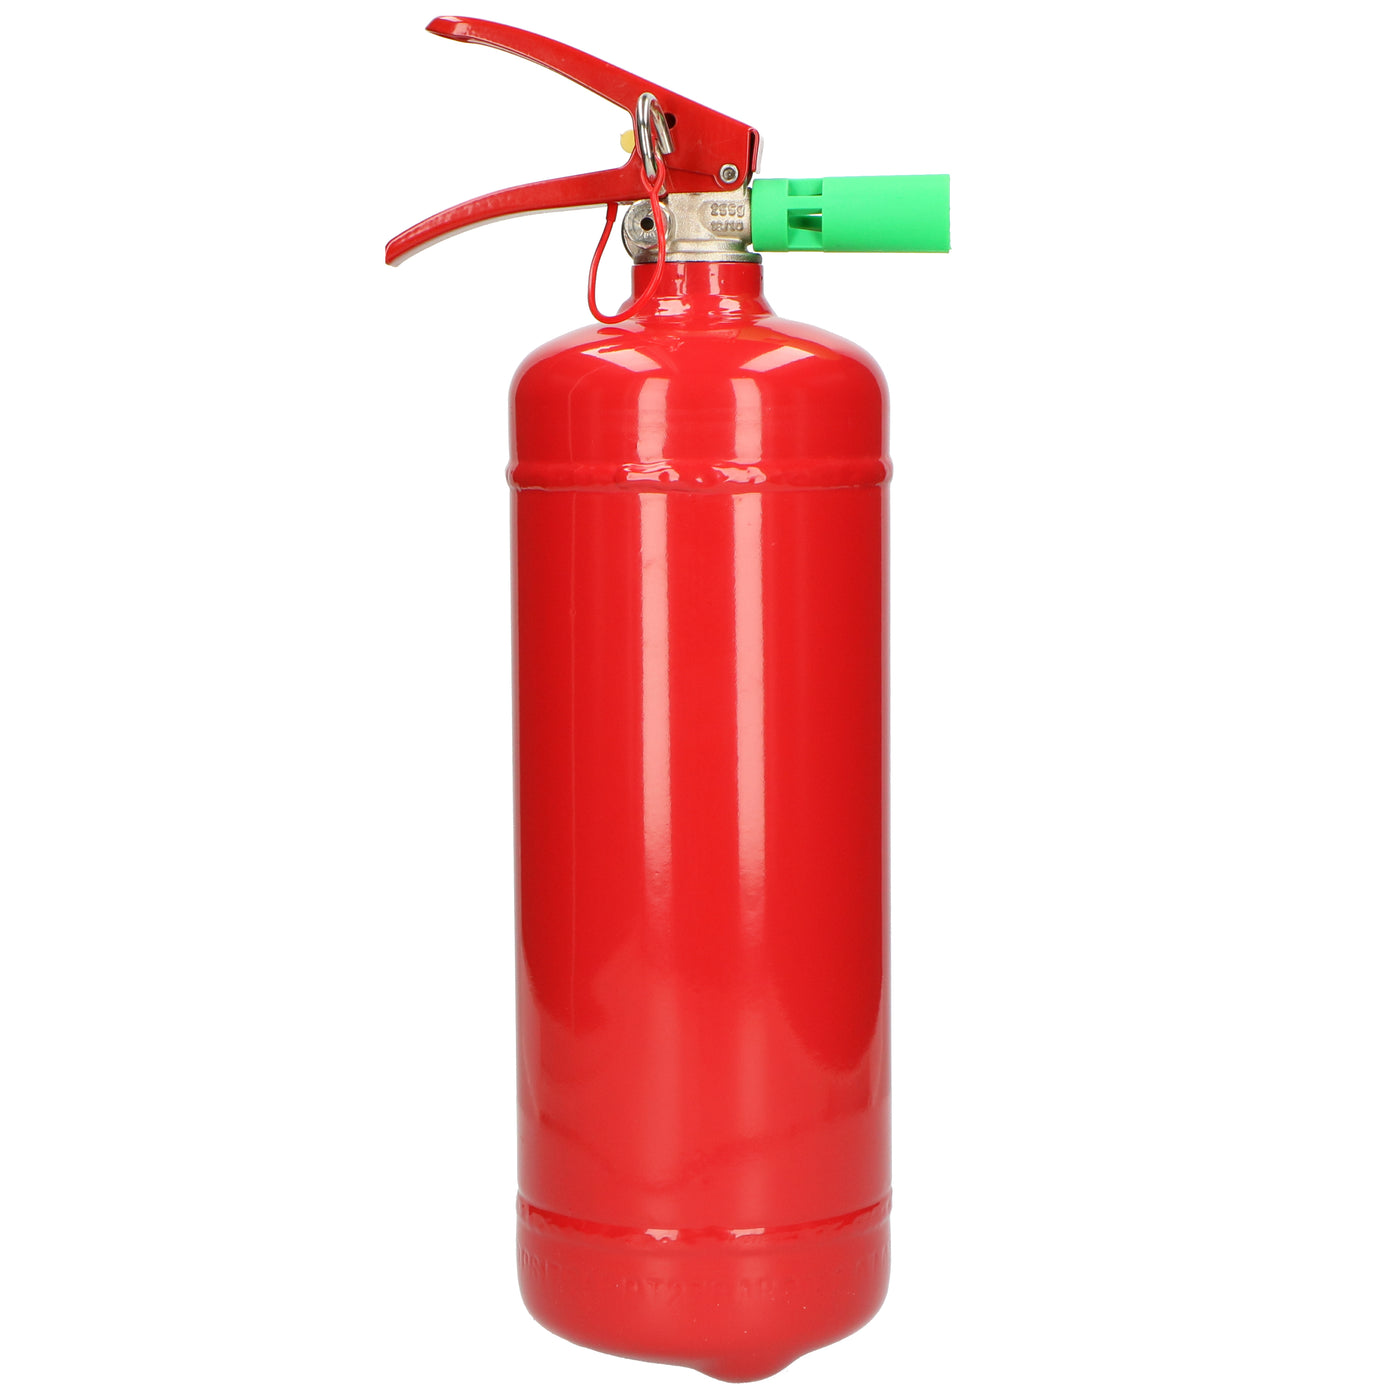 Alecto ABS-2 - Fire extinguisher foam 2 litres